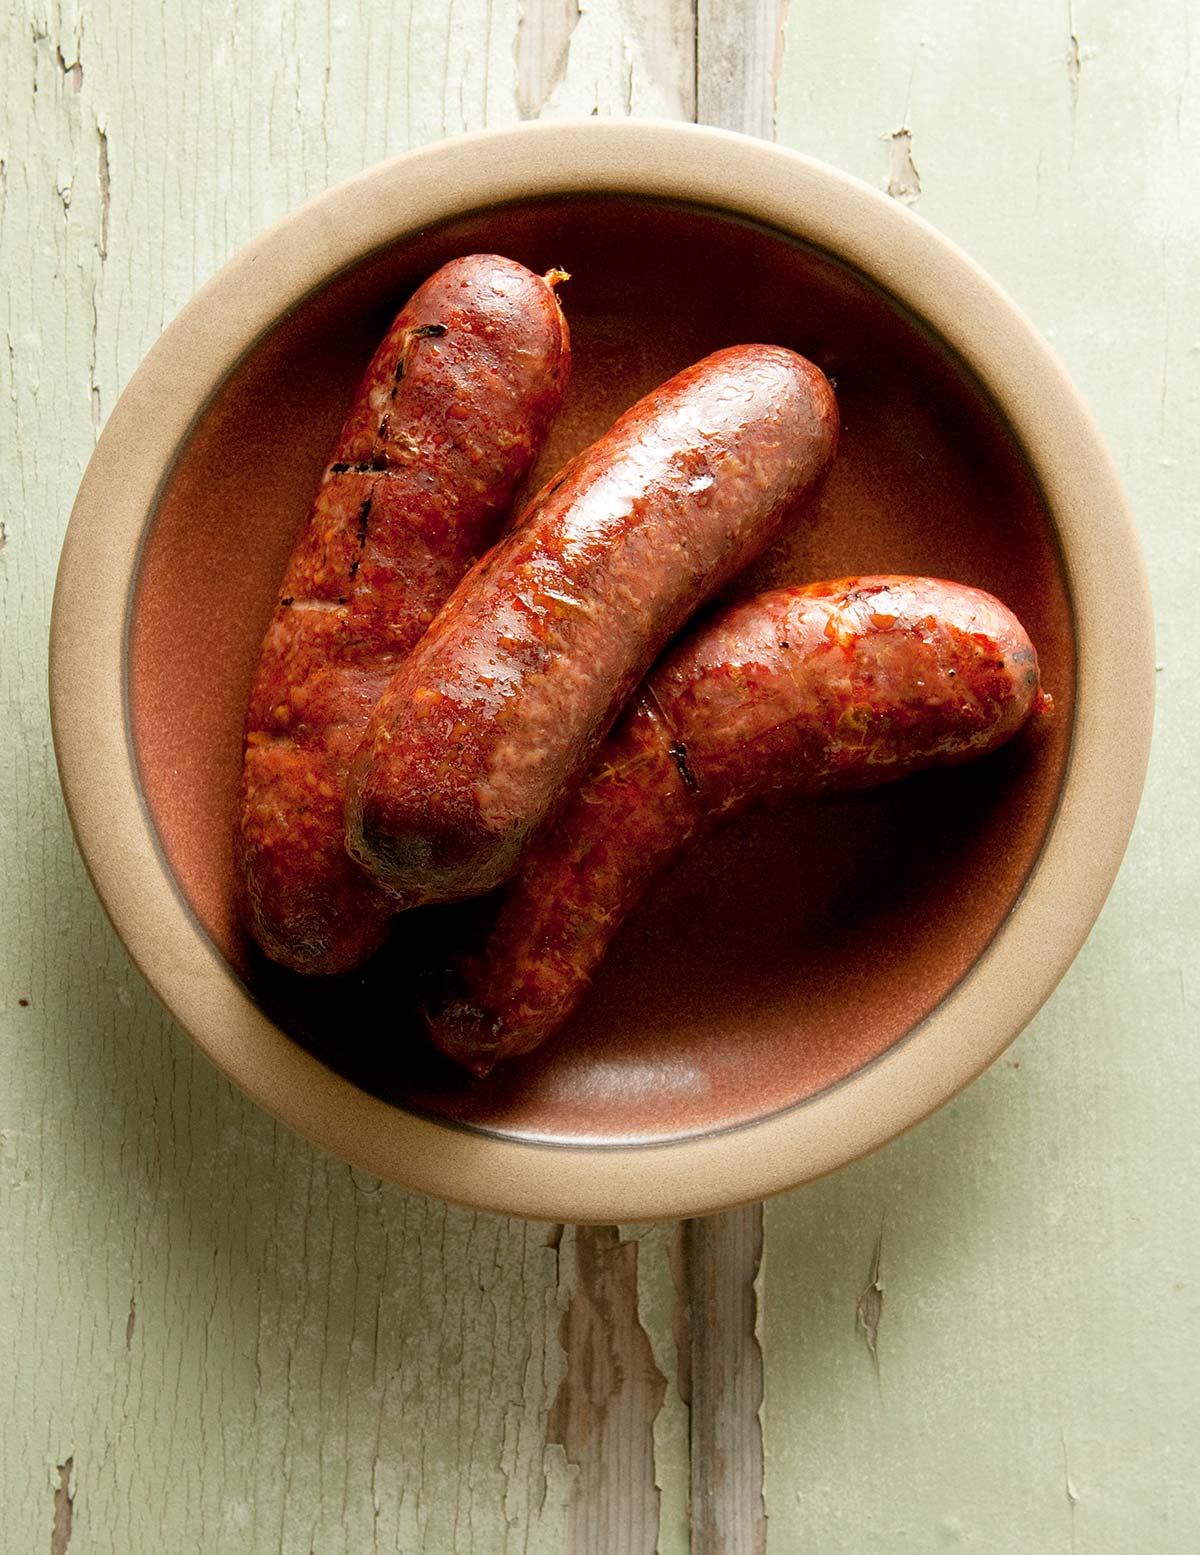 A plate of andouille sausage.